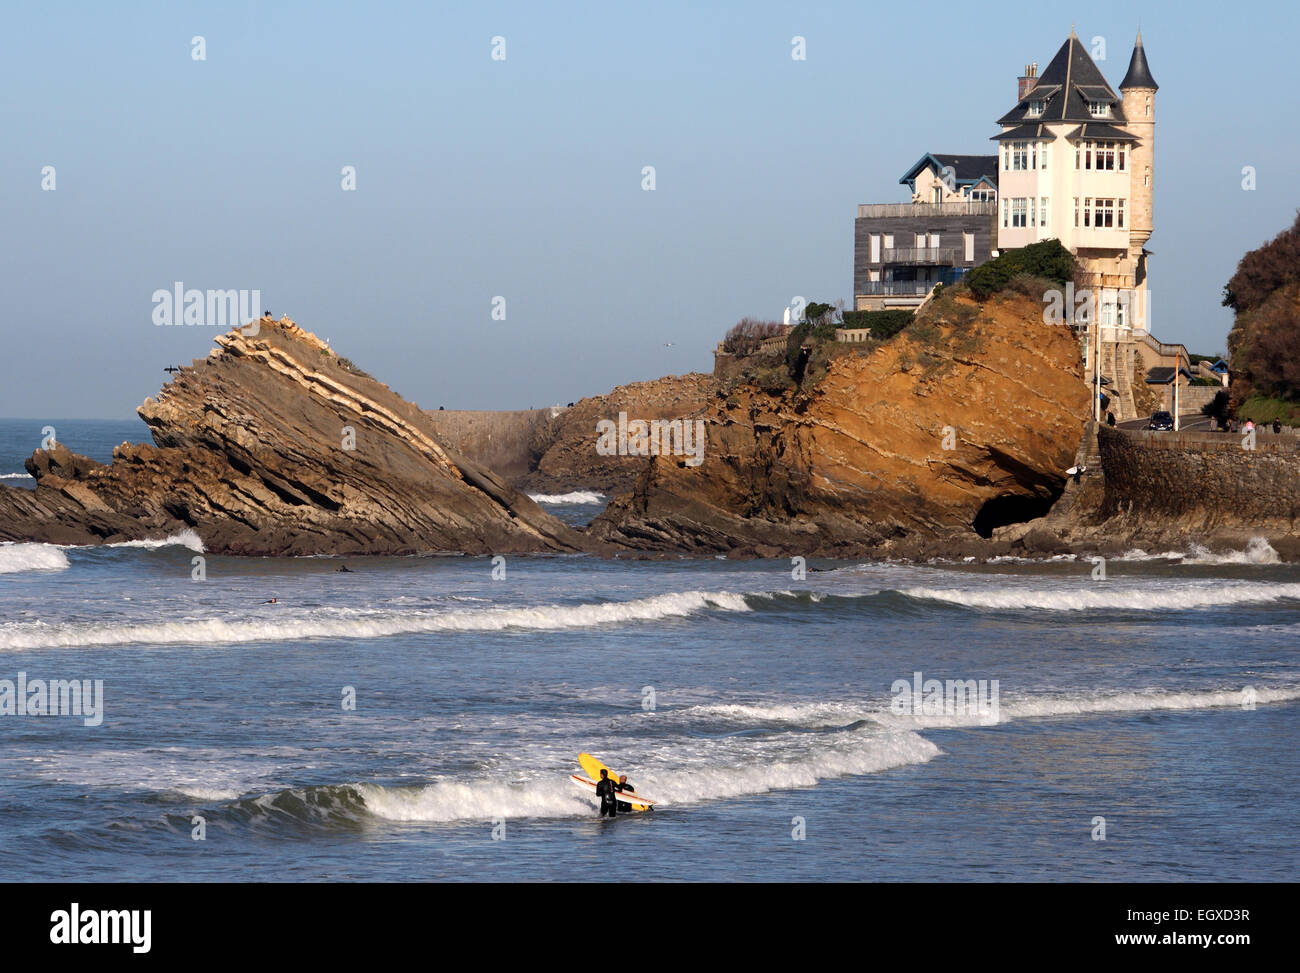 A surfer in Biarritz, in the Basque region of south-west France. Stock Photo